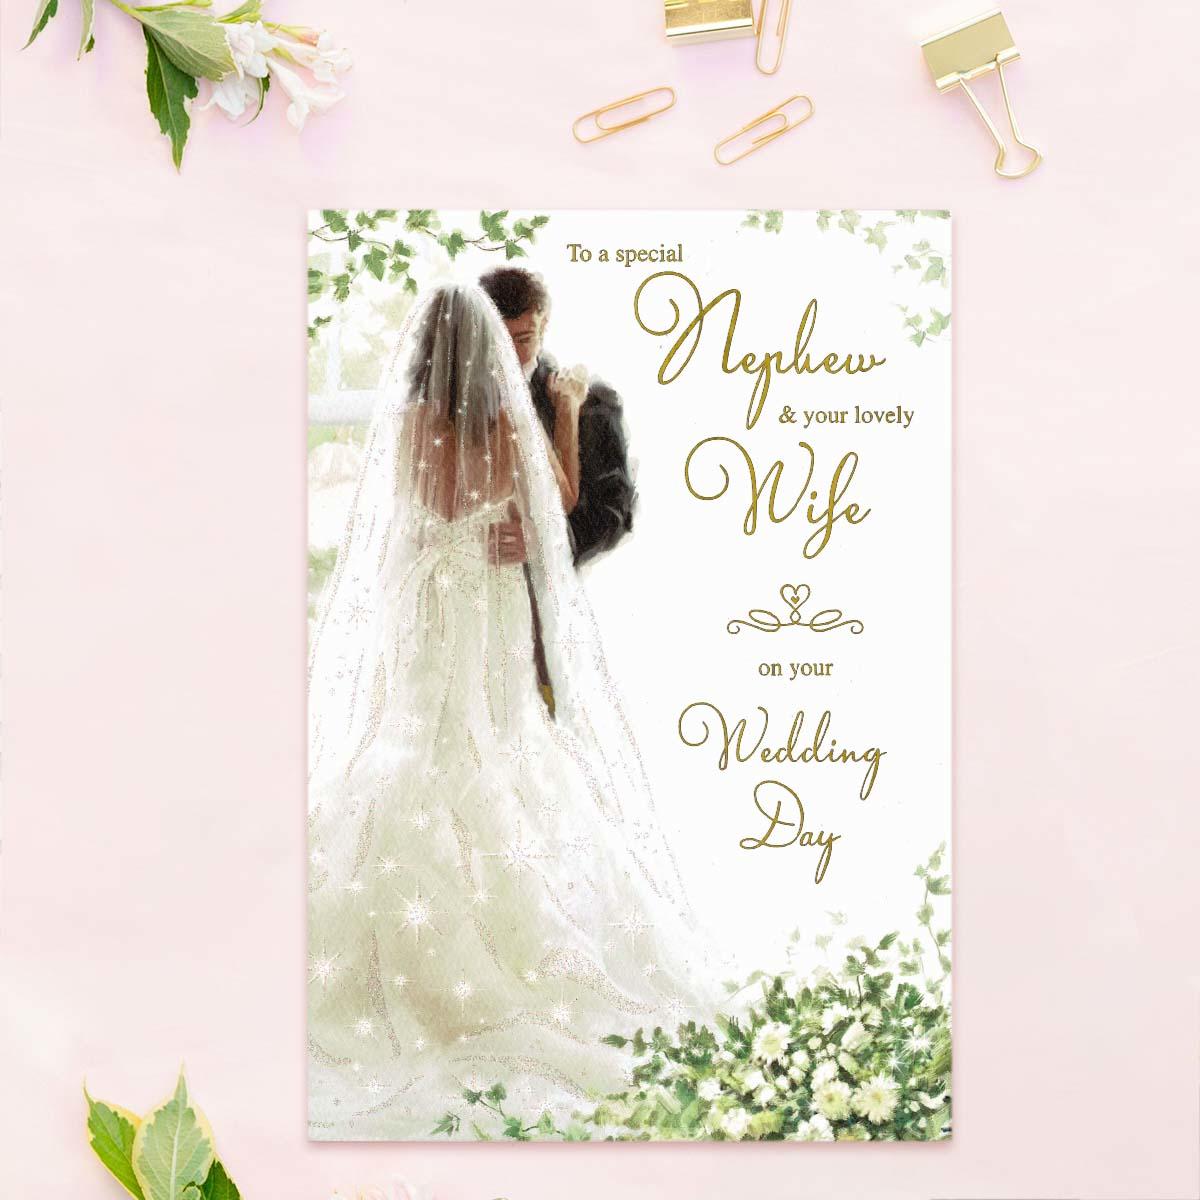 Nephew And Your Lovely Wife Wedding Day Card Front Image